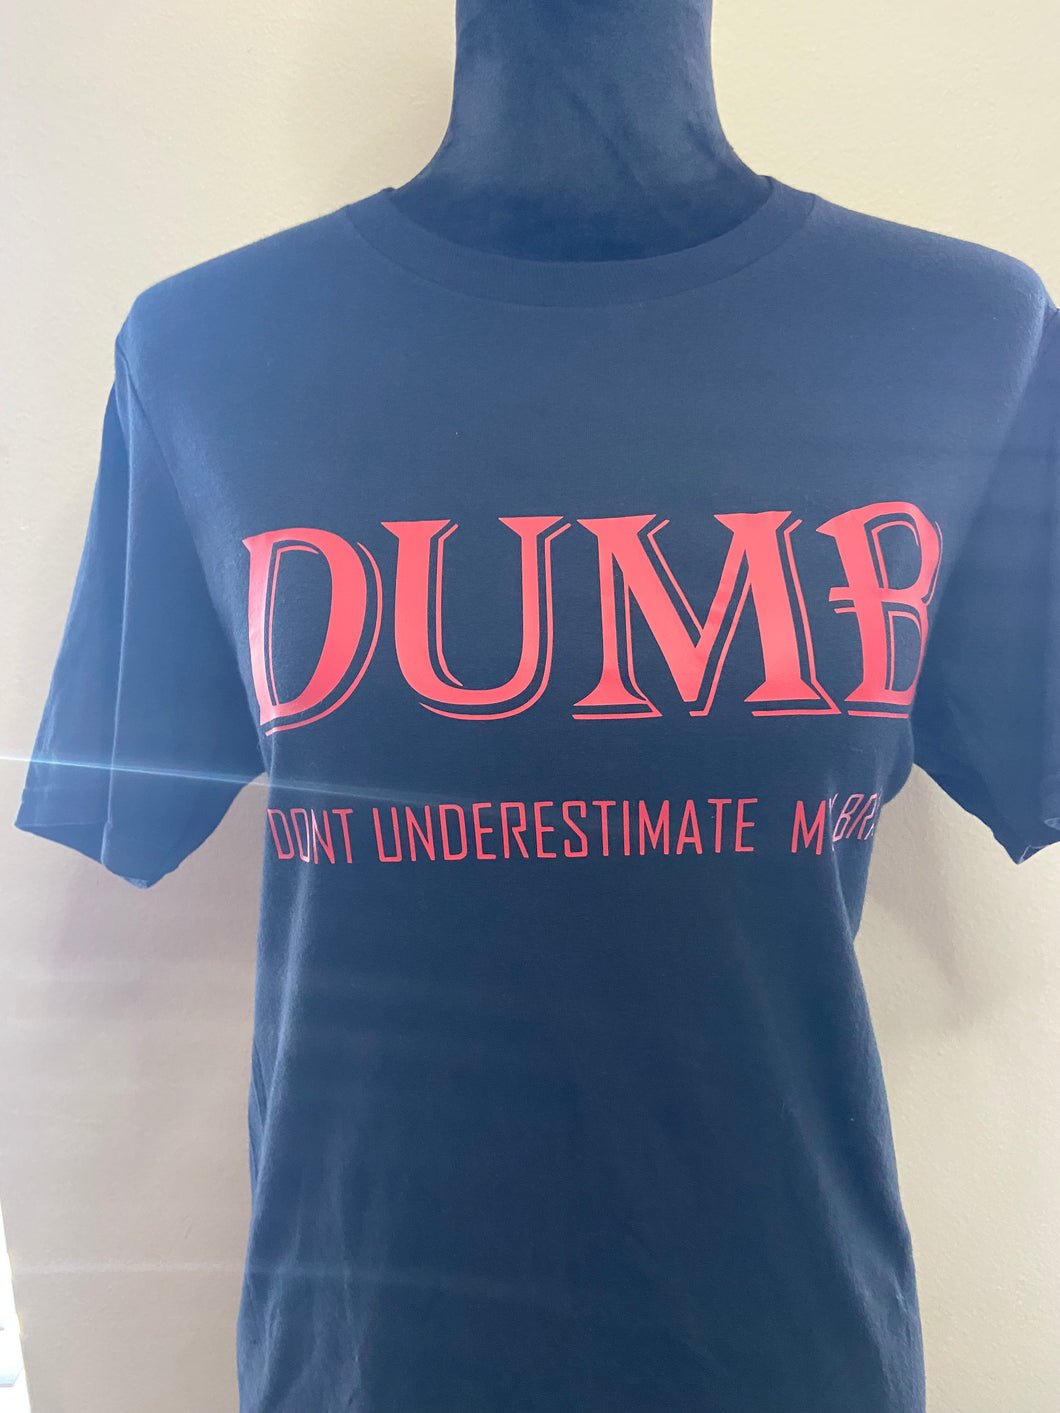 DUMB Black and Red T-shirt